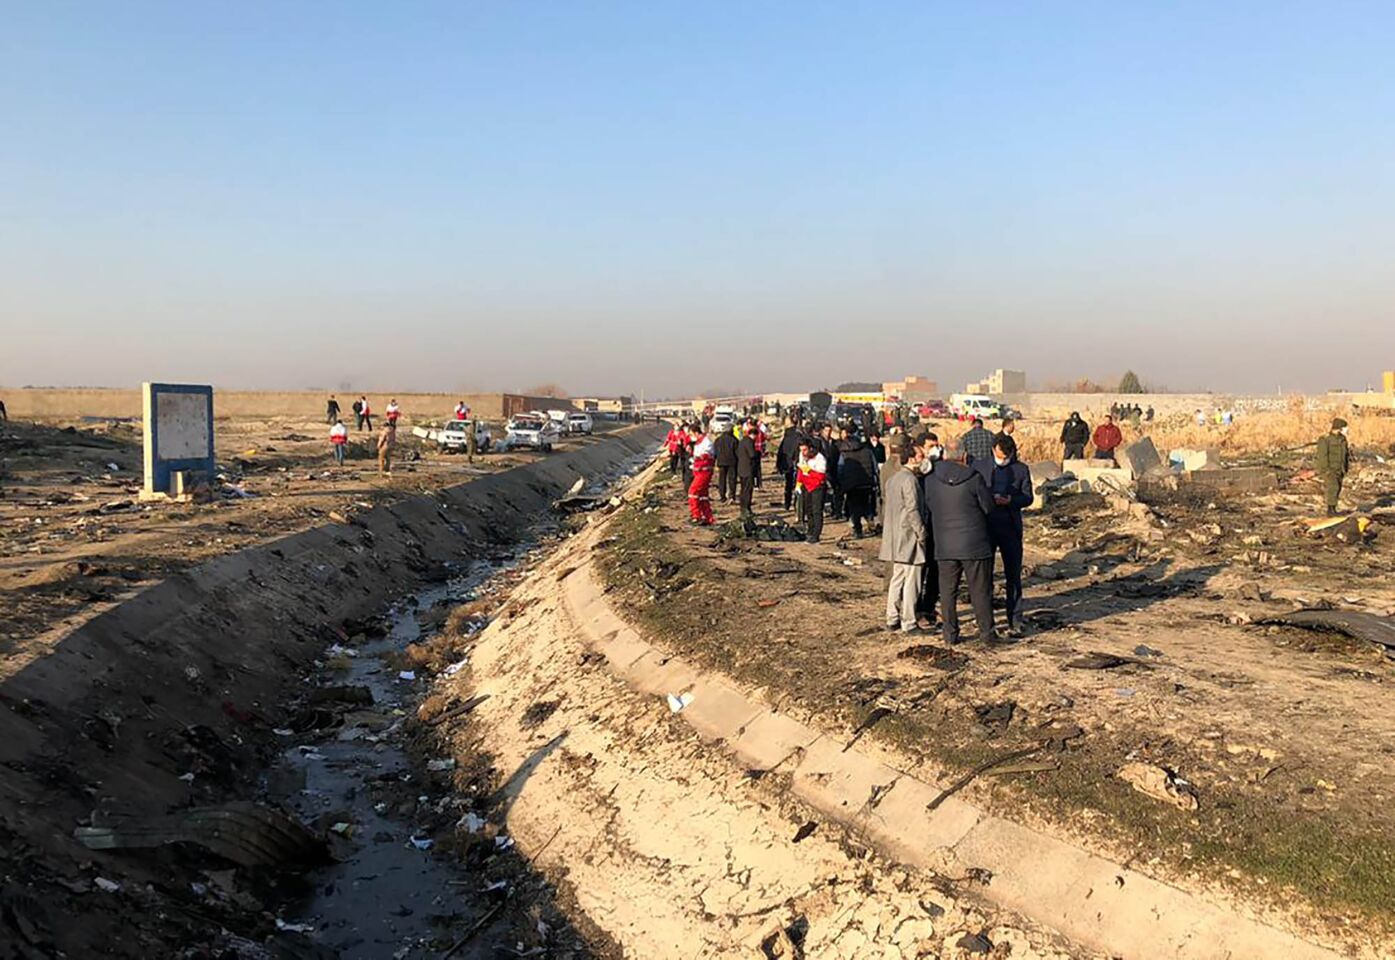 Another view of the debris from Wednesday's plane crash. The crash came hours after Iran launched a ballistic missile attack targeting two bases in Iraq housing U.S. forces in retaliation for the killing of Revolutionary Guard Gen. Qassem Suleimani.